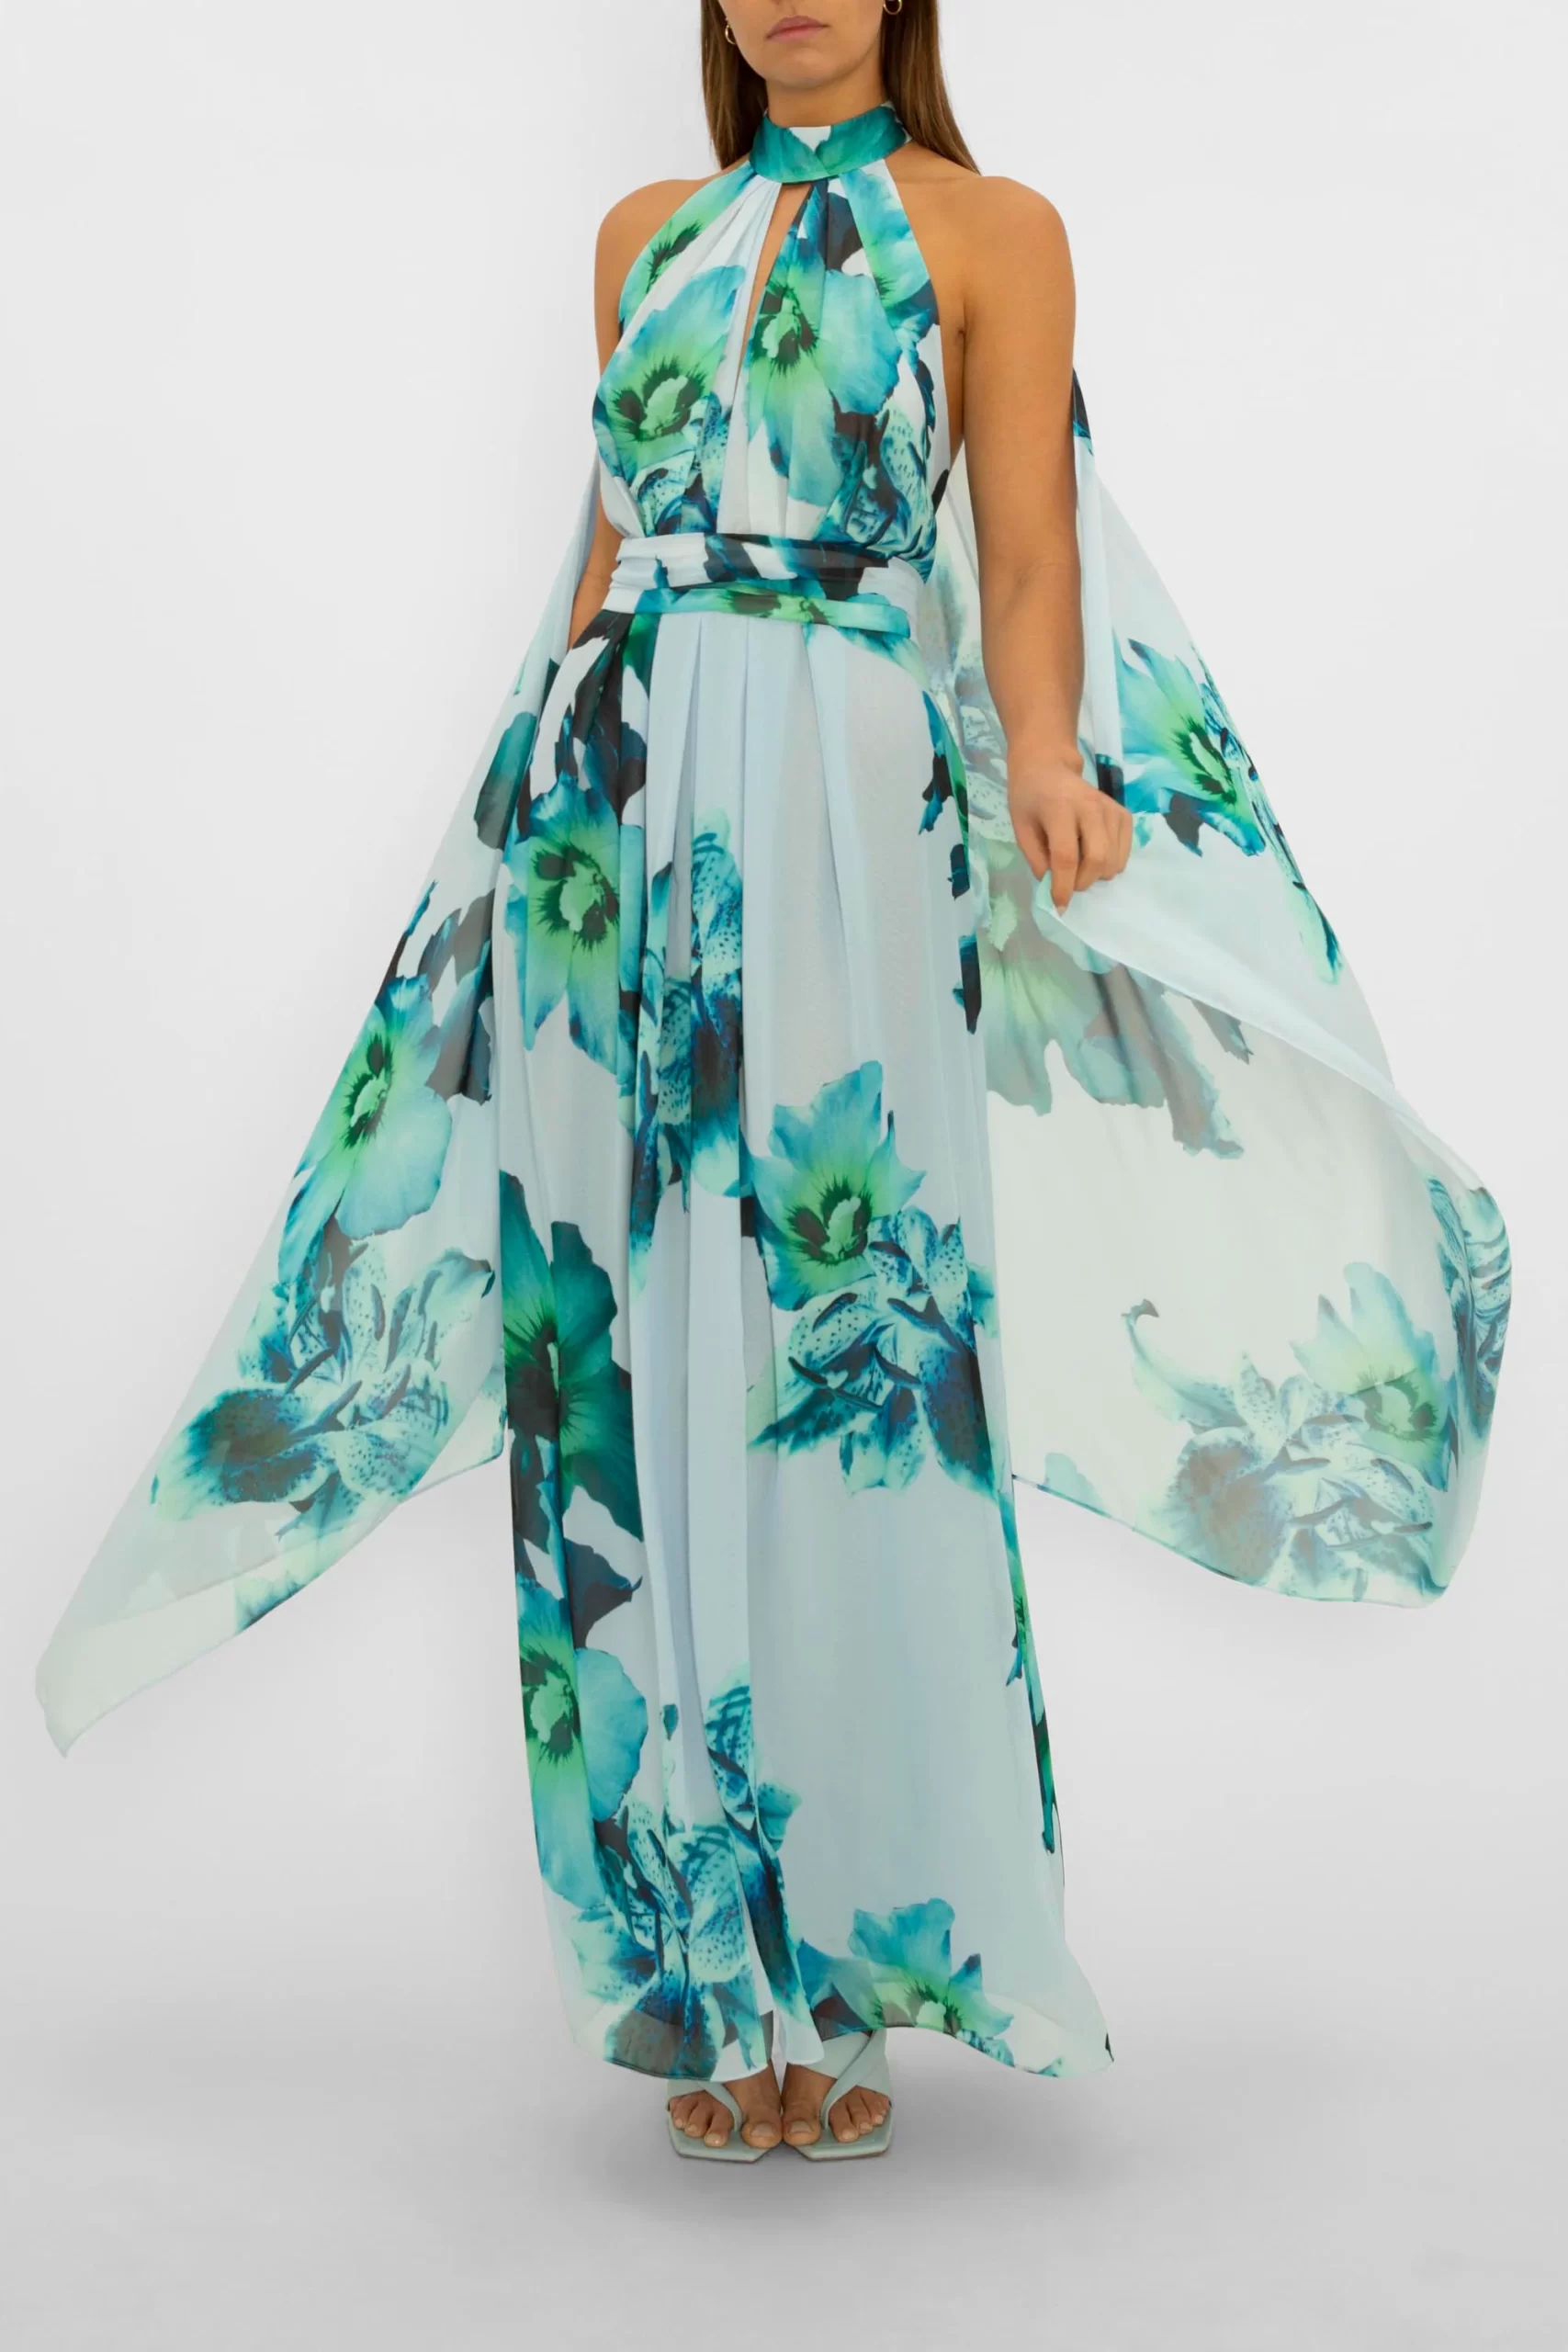 Style Hire by Sarah-blue-mid-summer-nights-dream-gown-1 1600x@2x